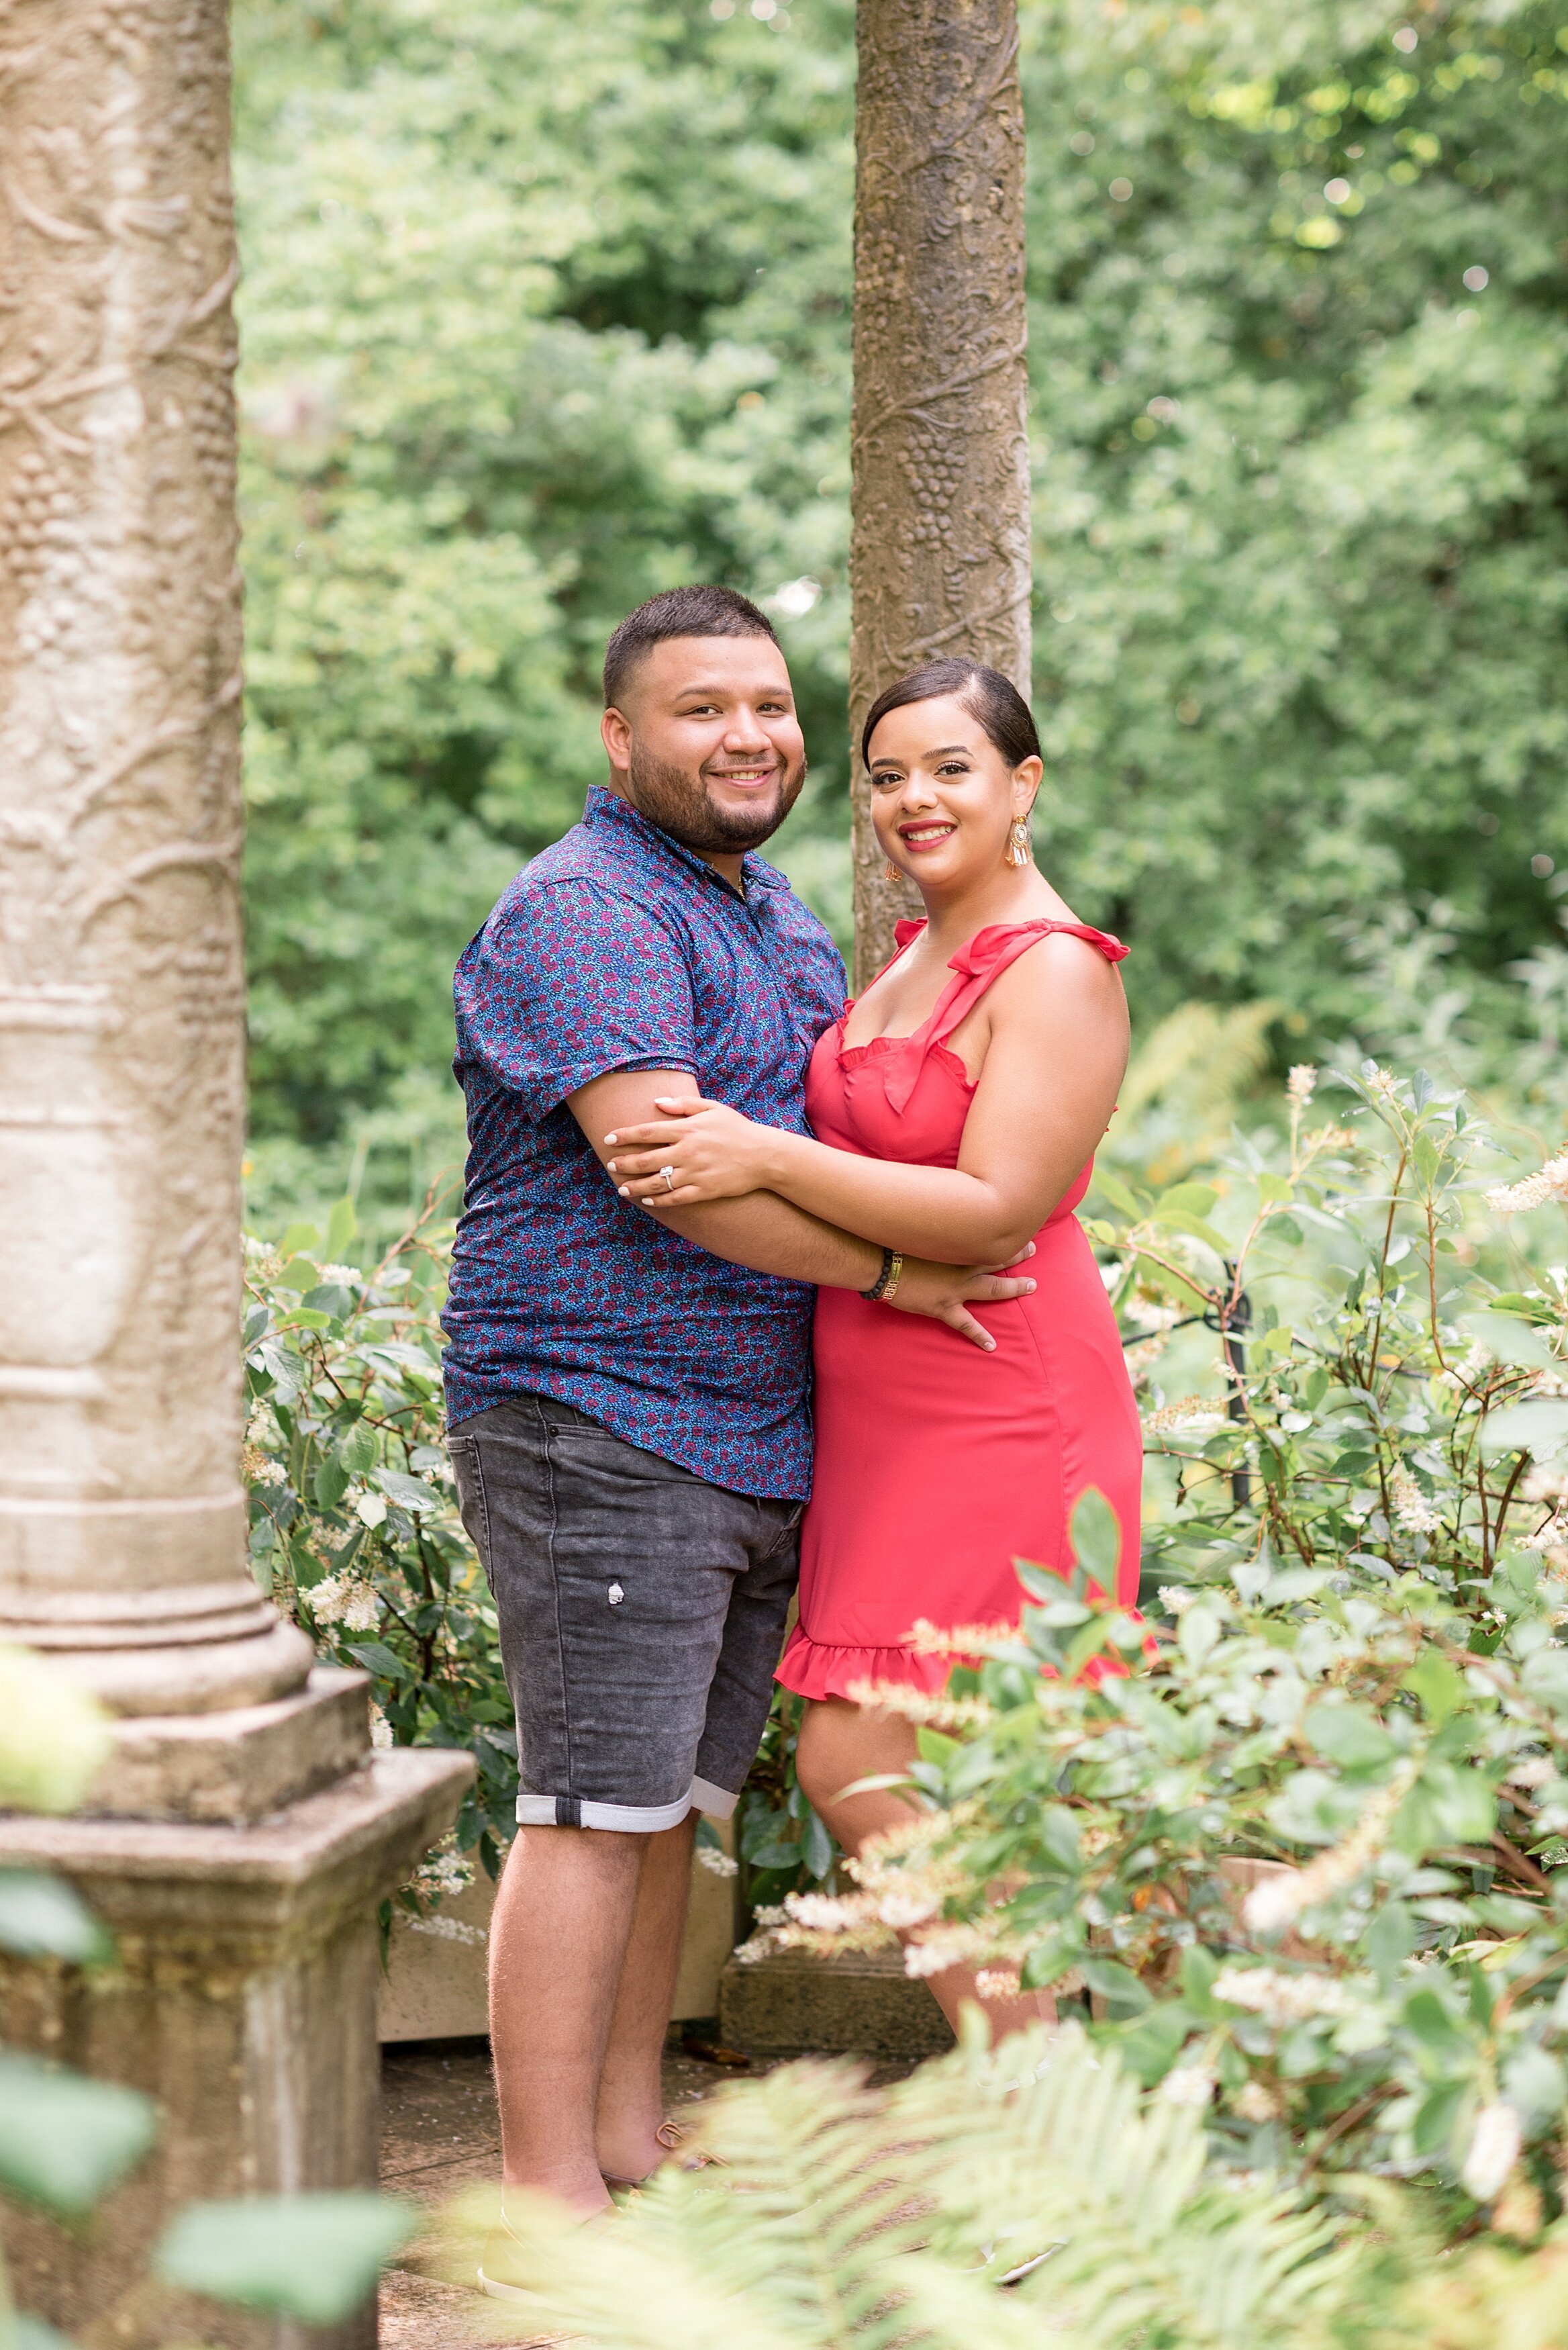 Longwood Gardens Kennet Square Pa Summer Engagement Session Photography_7682.jpg